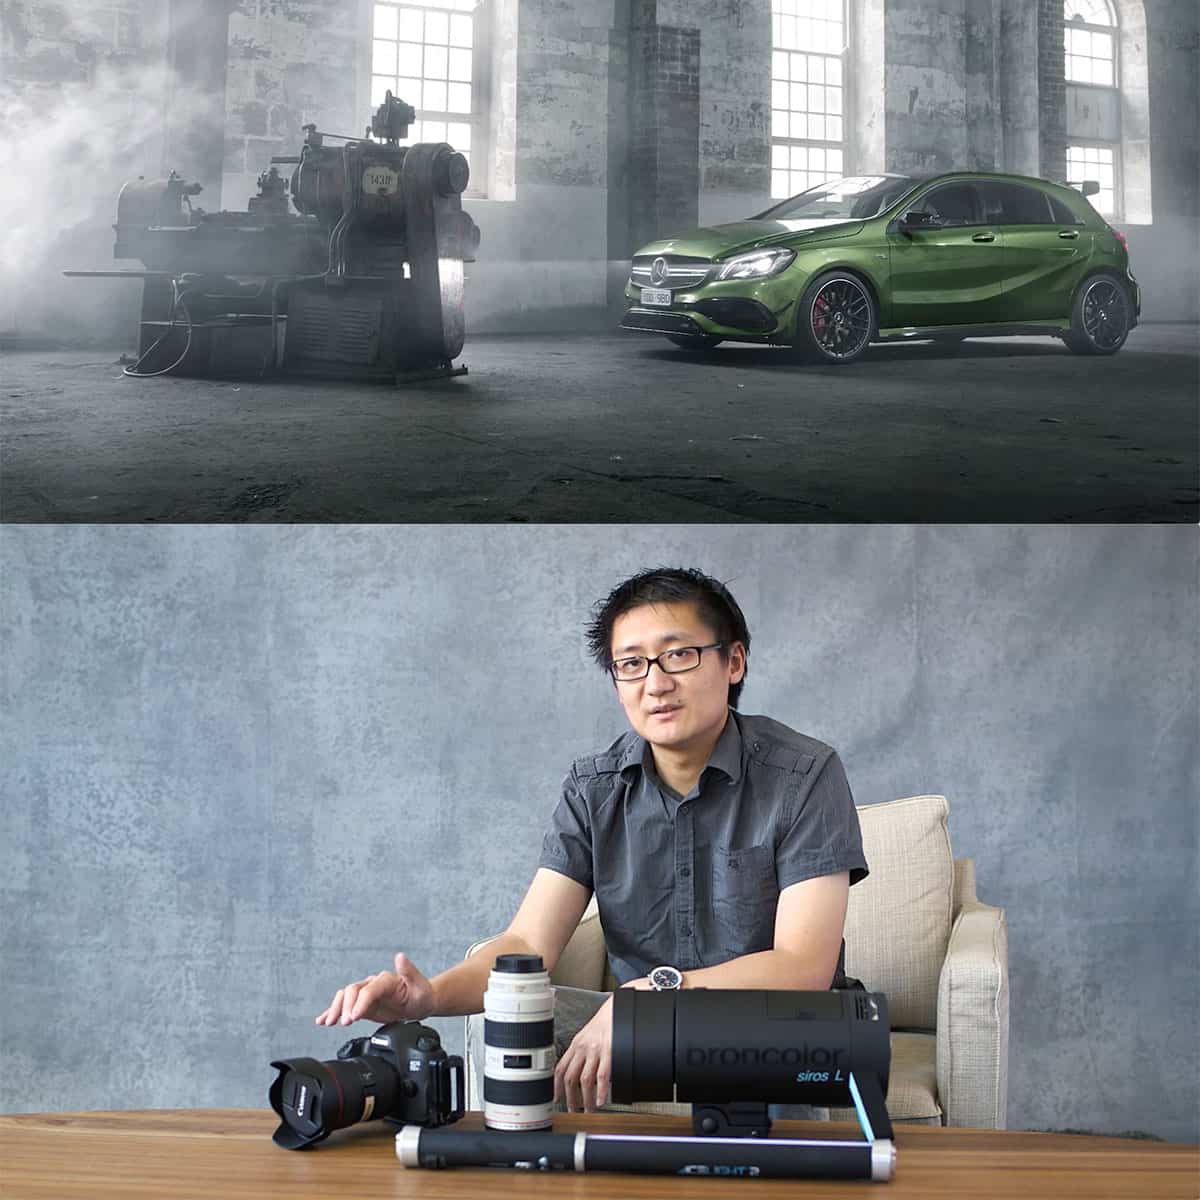 Professional car photo shoot with advanced gear, featured in PRO EDU course